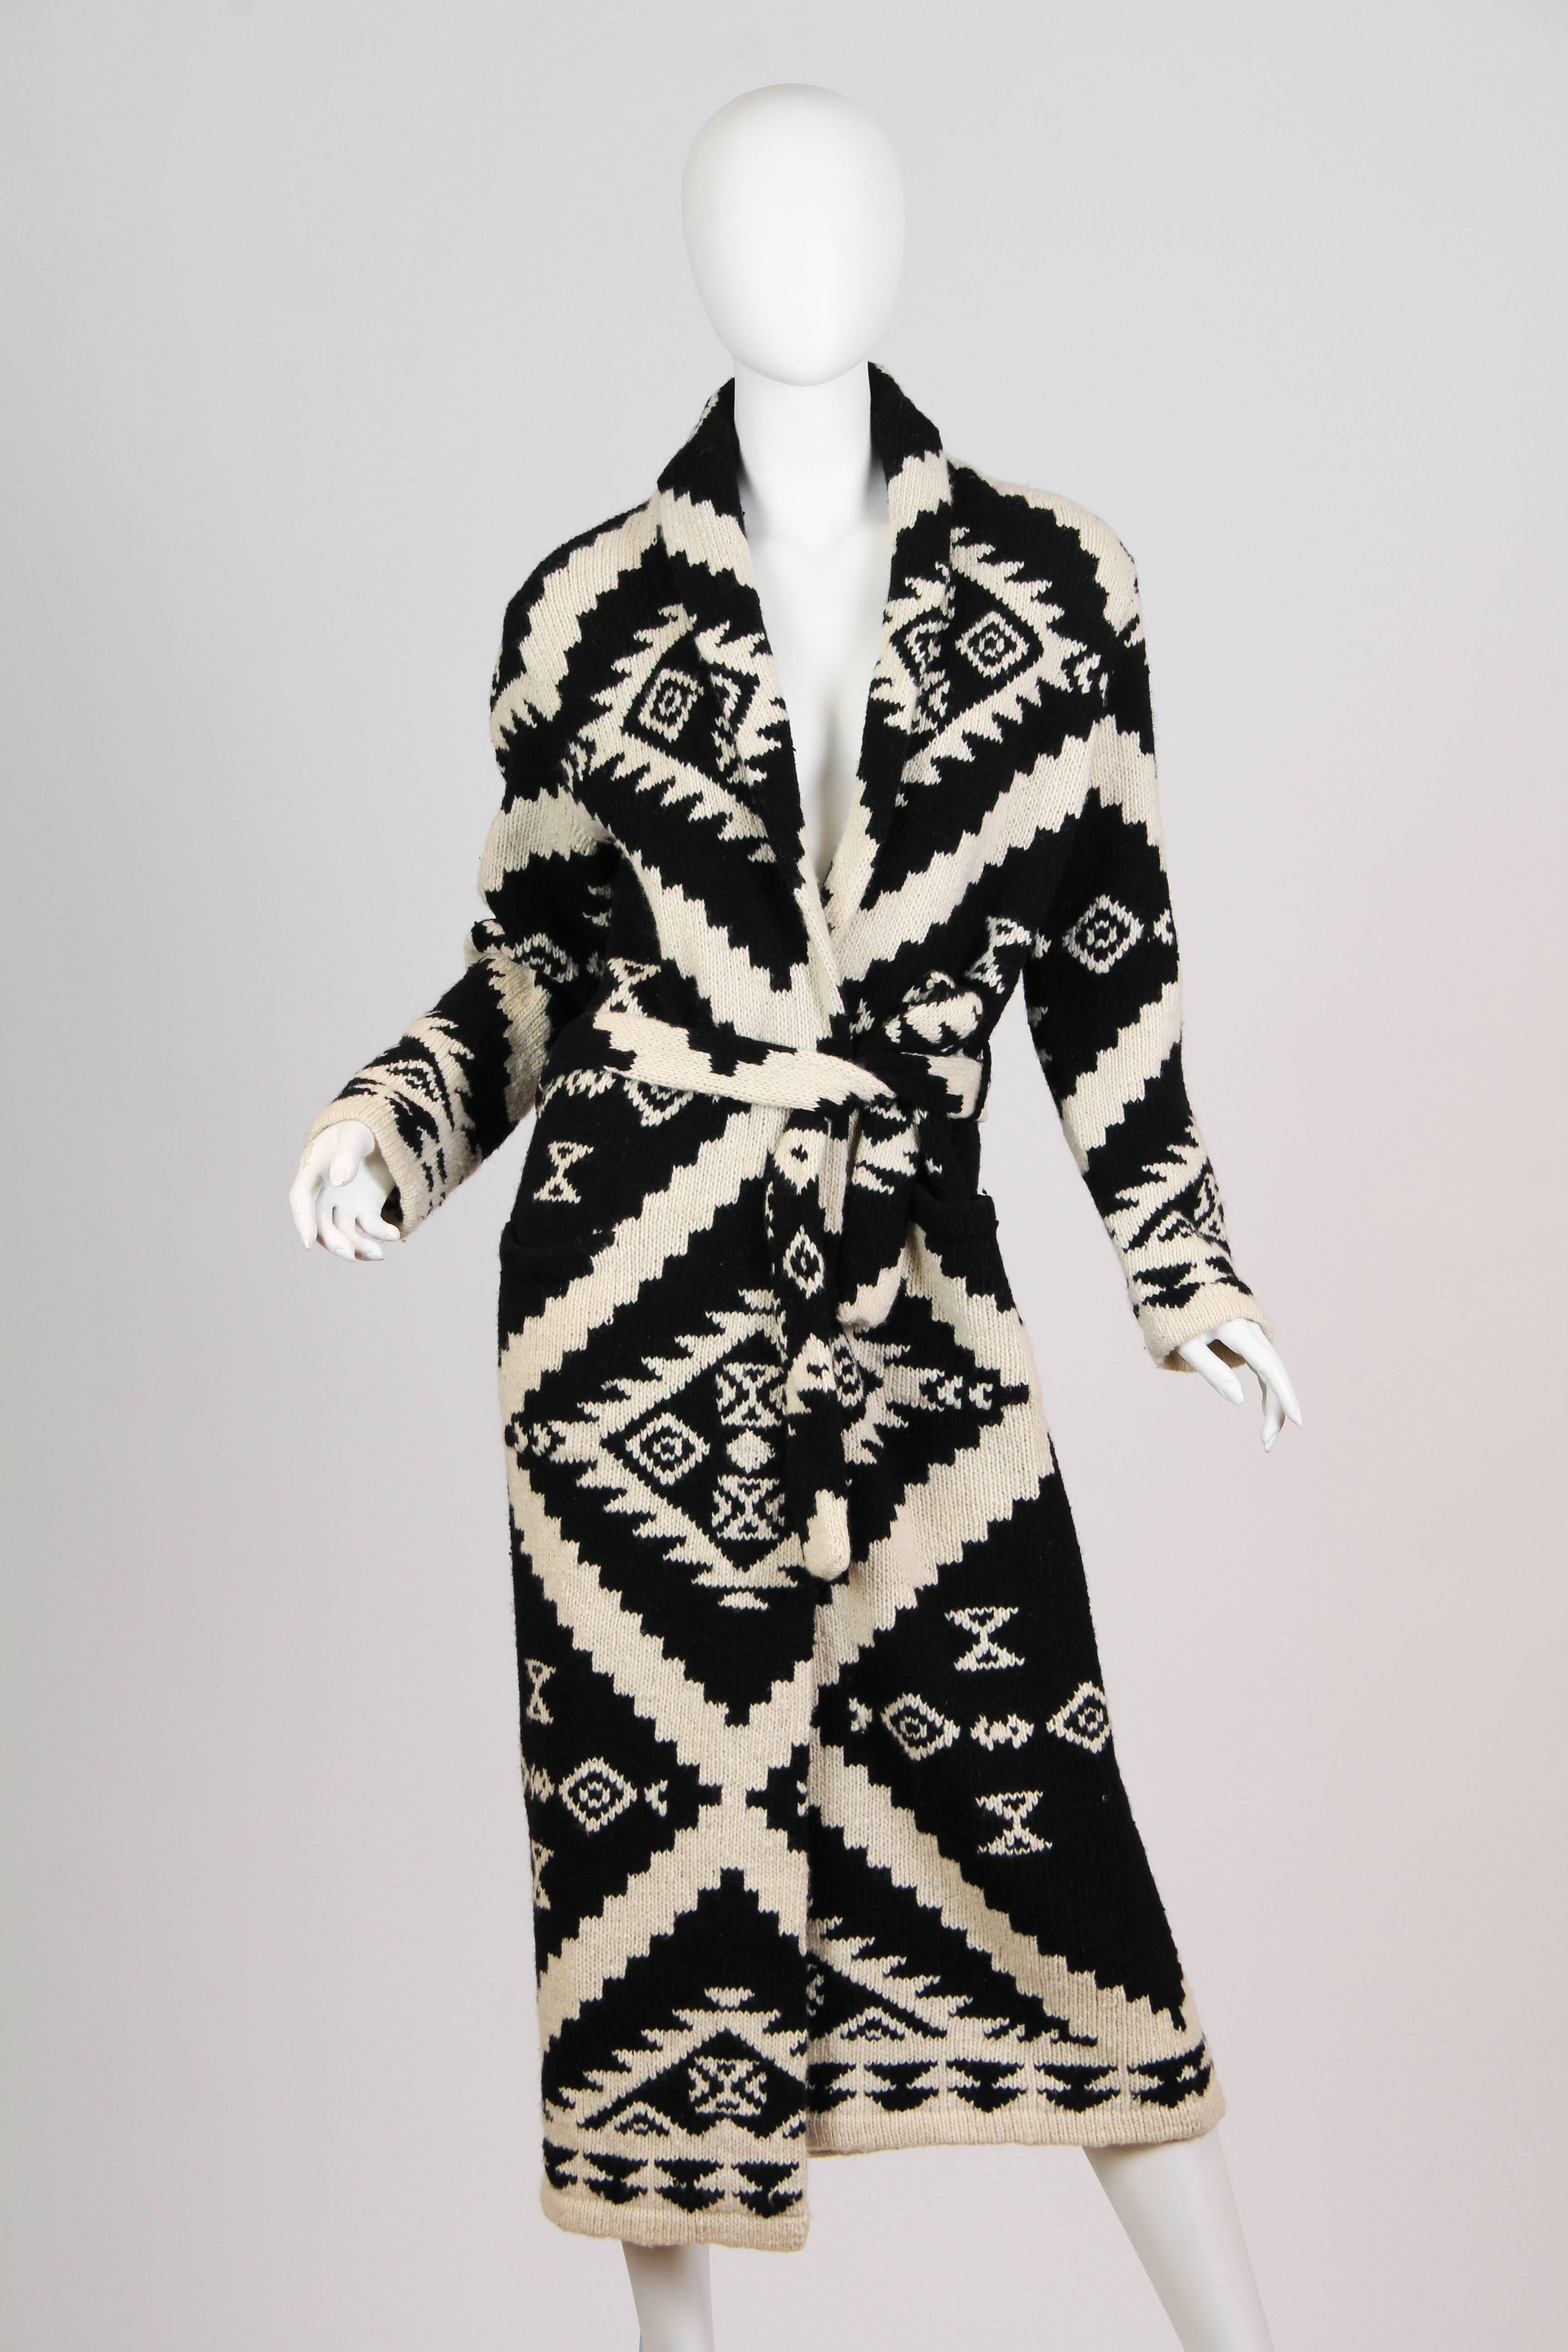 This is a beautiful cardigan sweater of black and white  knit. The thick knit is soft and cozy, and the deep black and creamy ivory shades are classically elegant - particularly in the shin-skimming length. The pattern is of geometric, zig-zagging